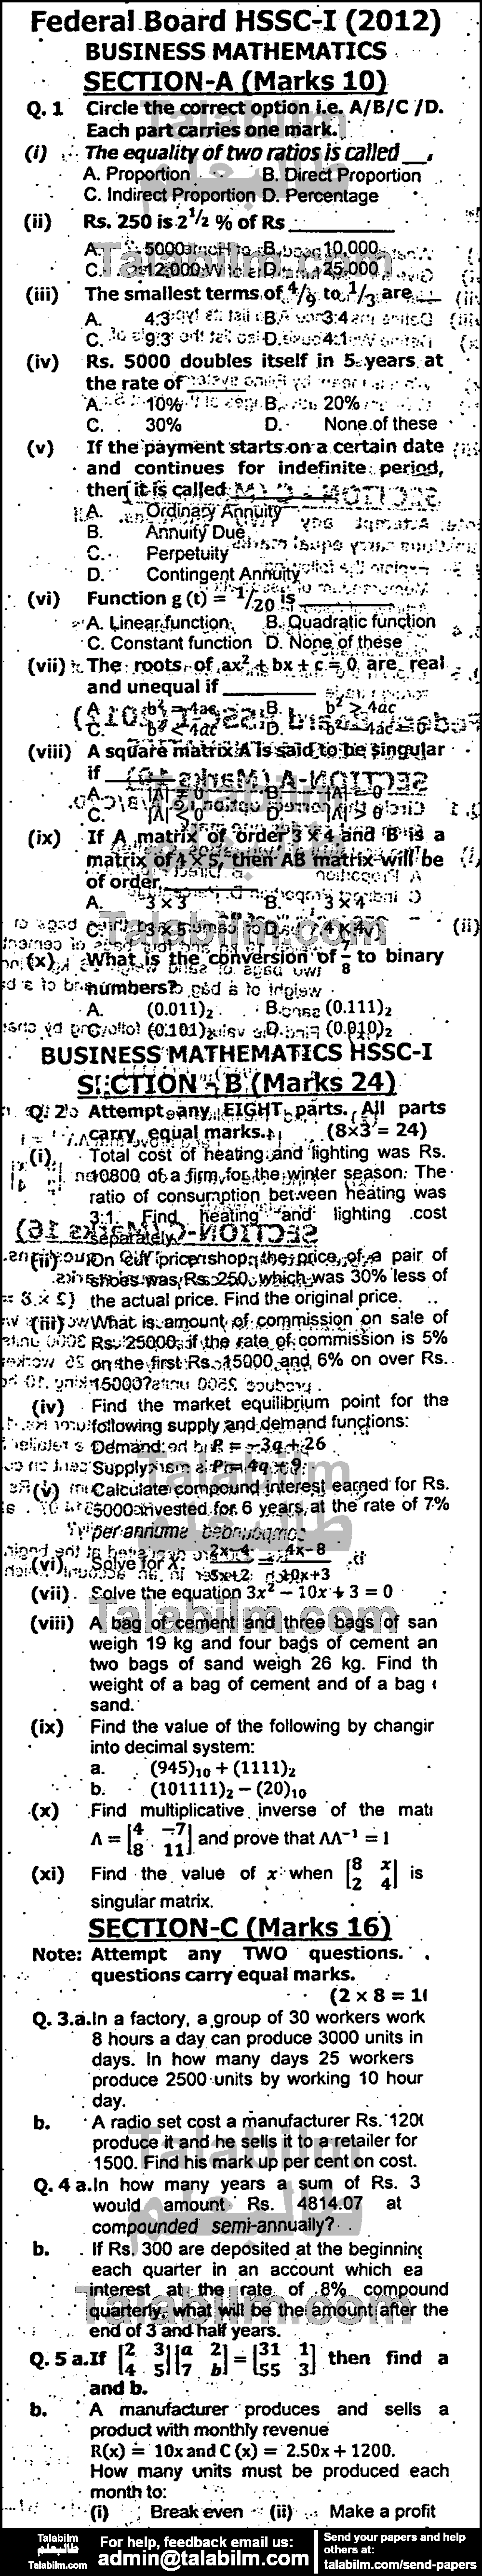 Business Mathematics 0 past paper for Group-I 2012